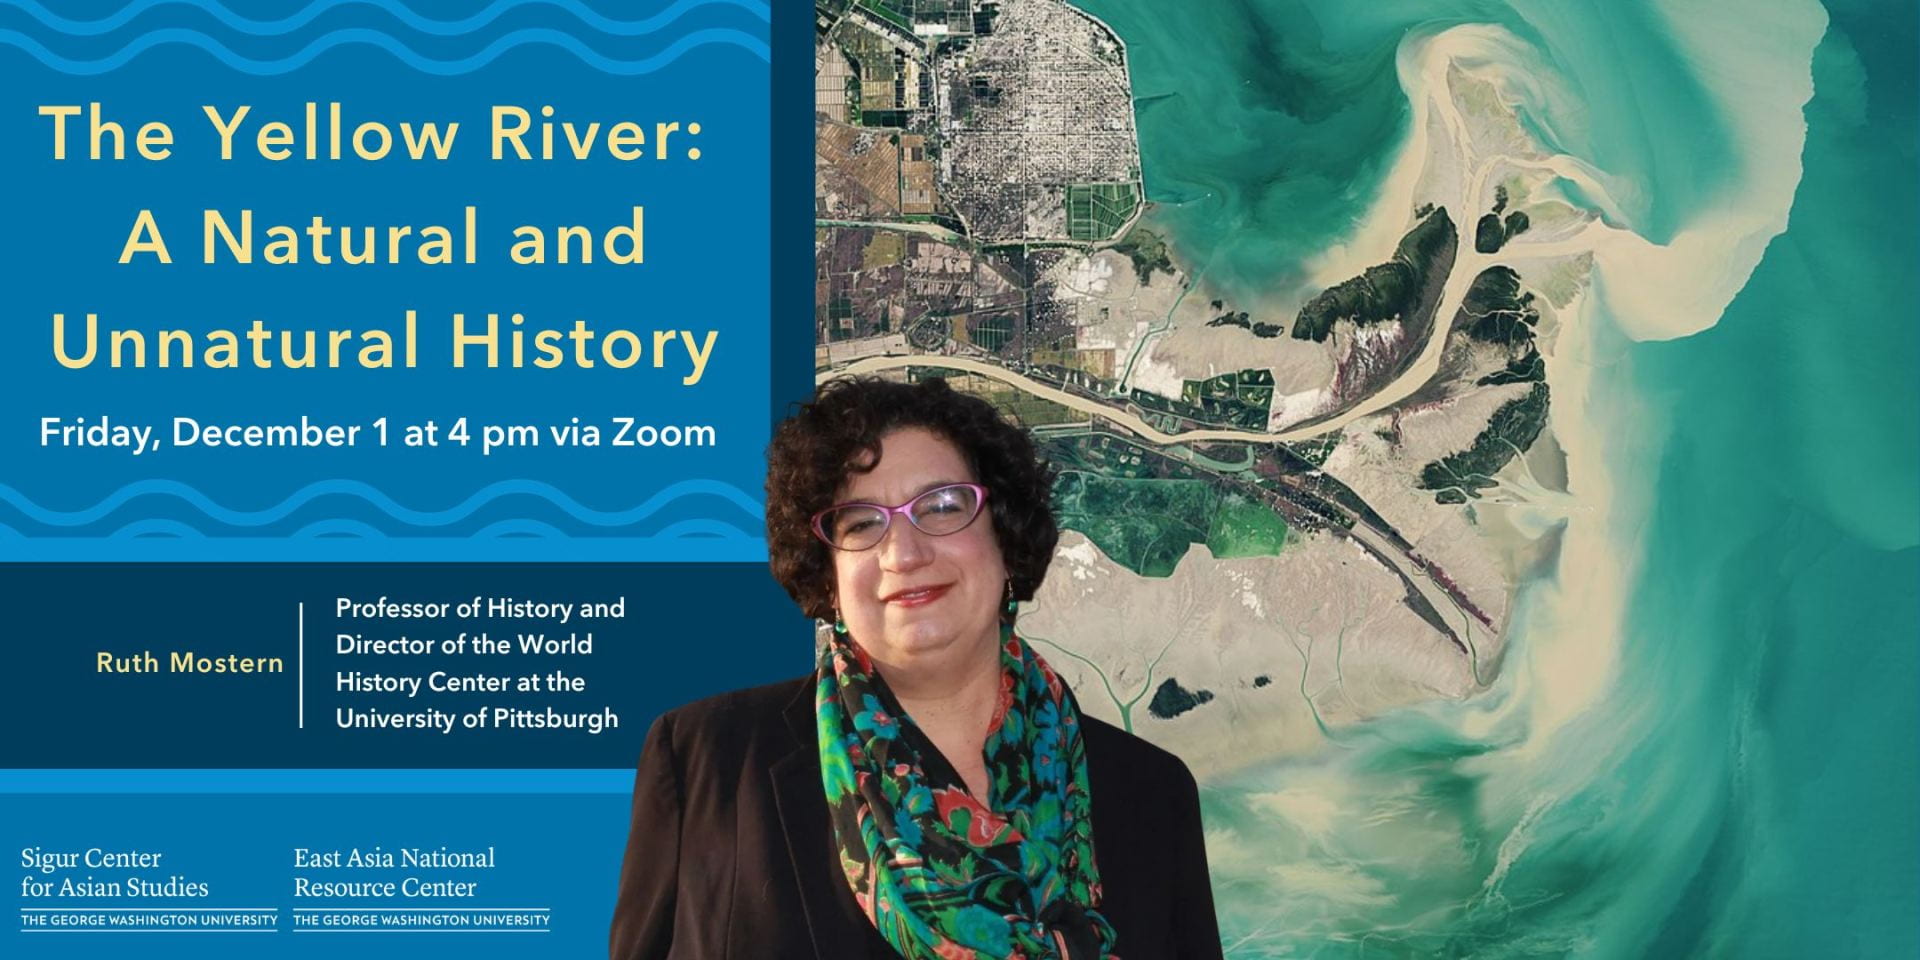 Talk flyer with a picture of Ruth Mostern and a satellite image of the Yellow River delta